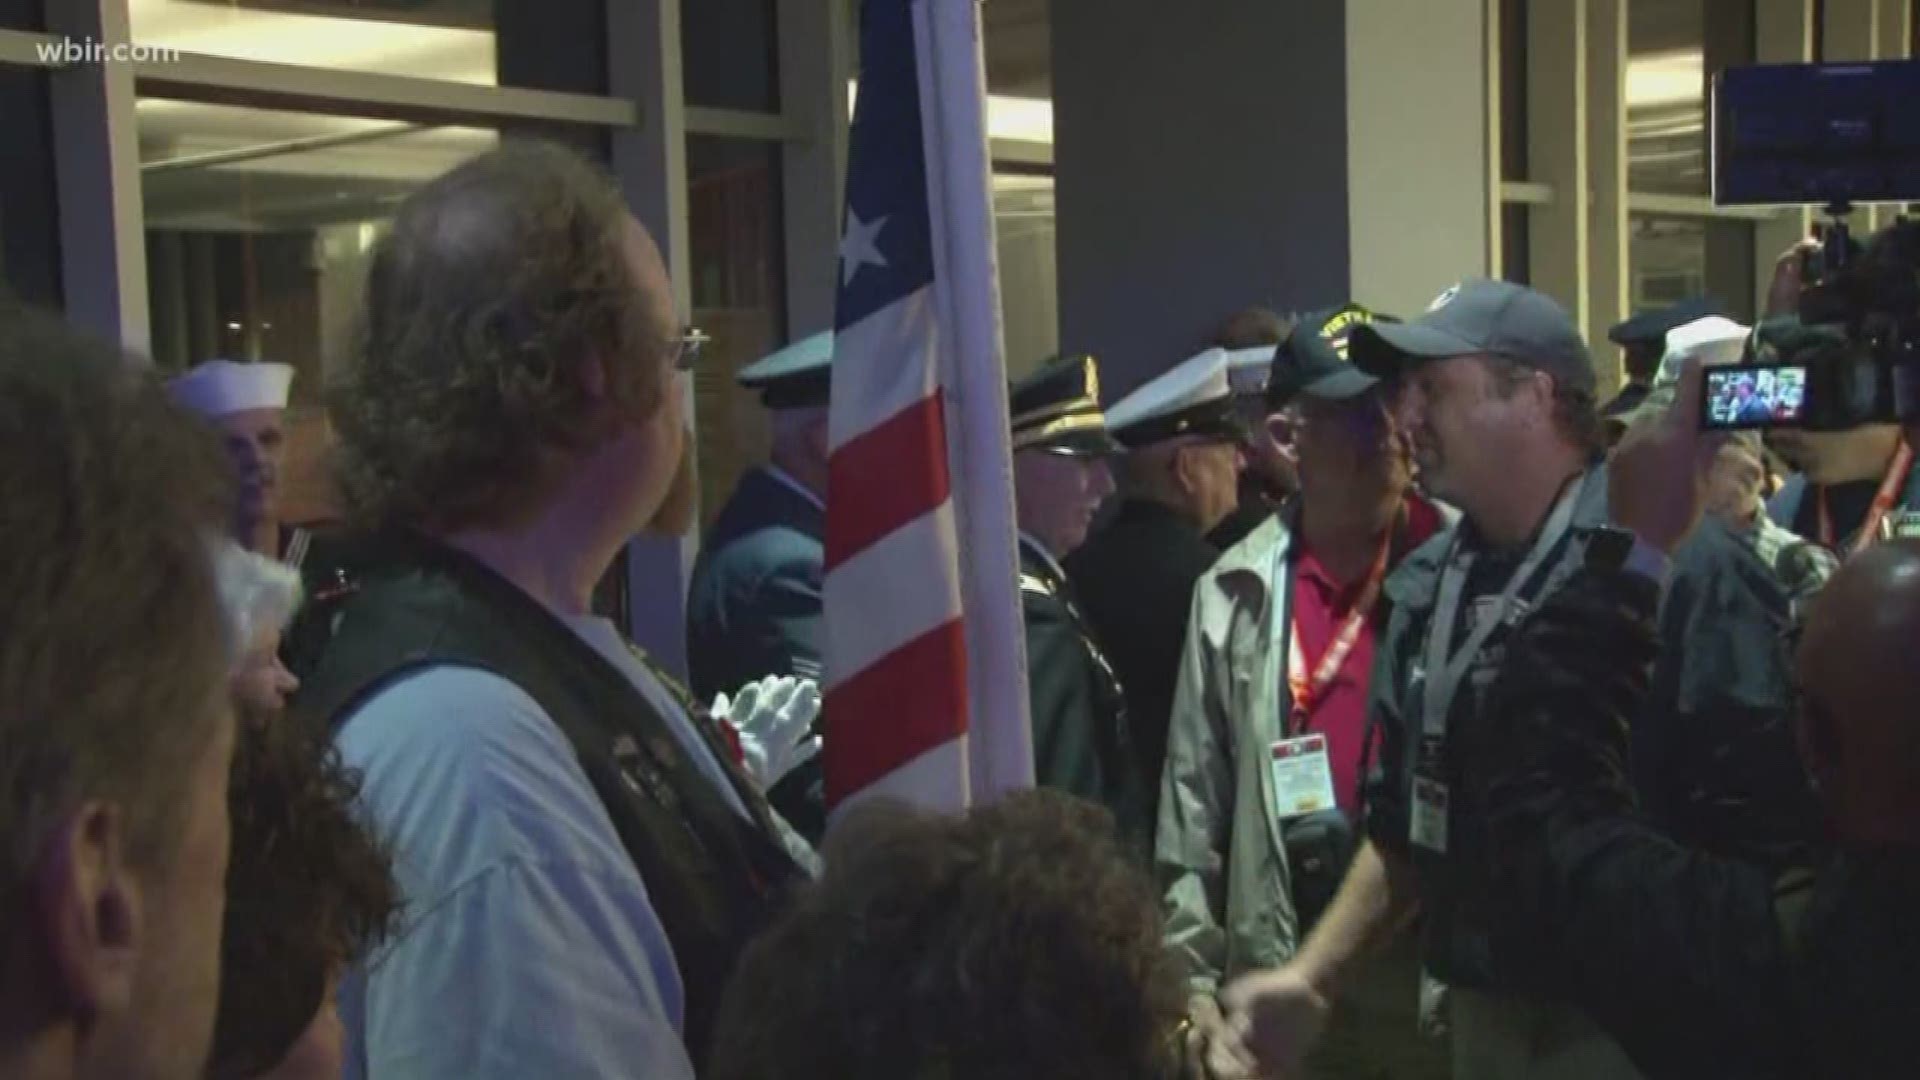 April 11, 2018: More than 130 East Tennessee veterans returned from a trip to Washington D.C. with HonorAir Flight 26.